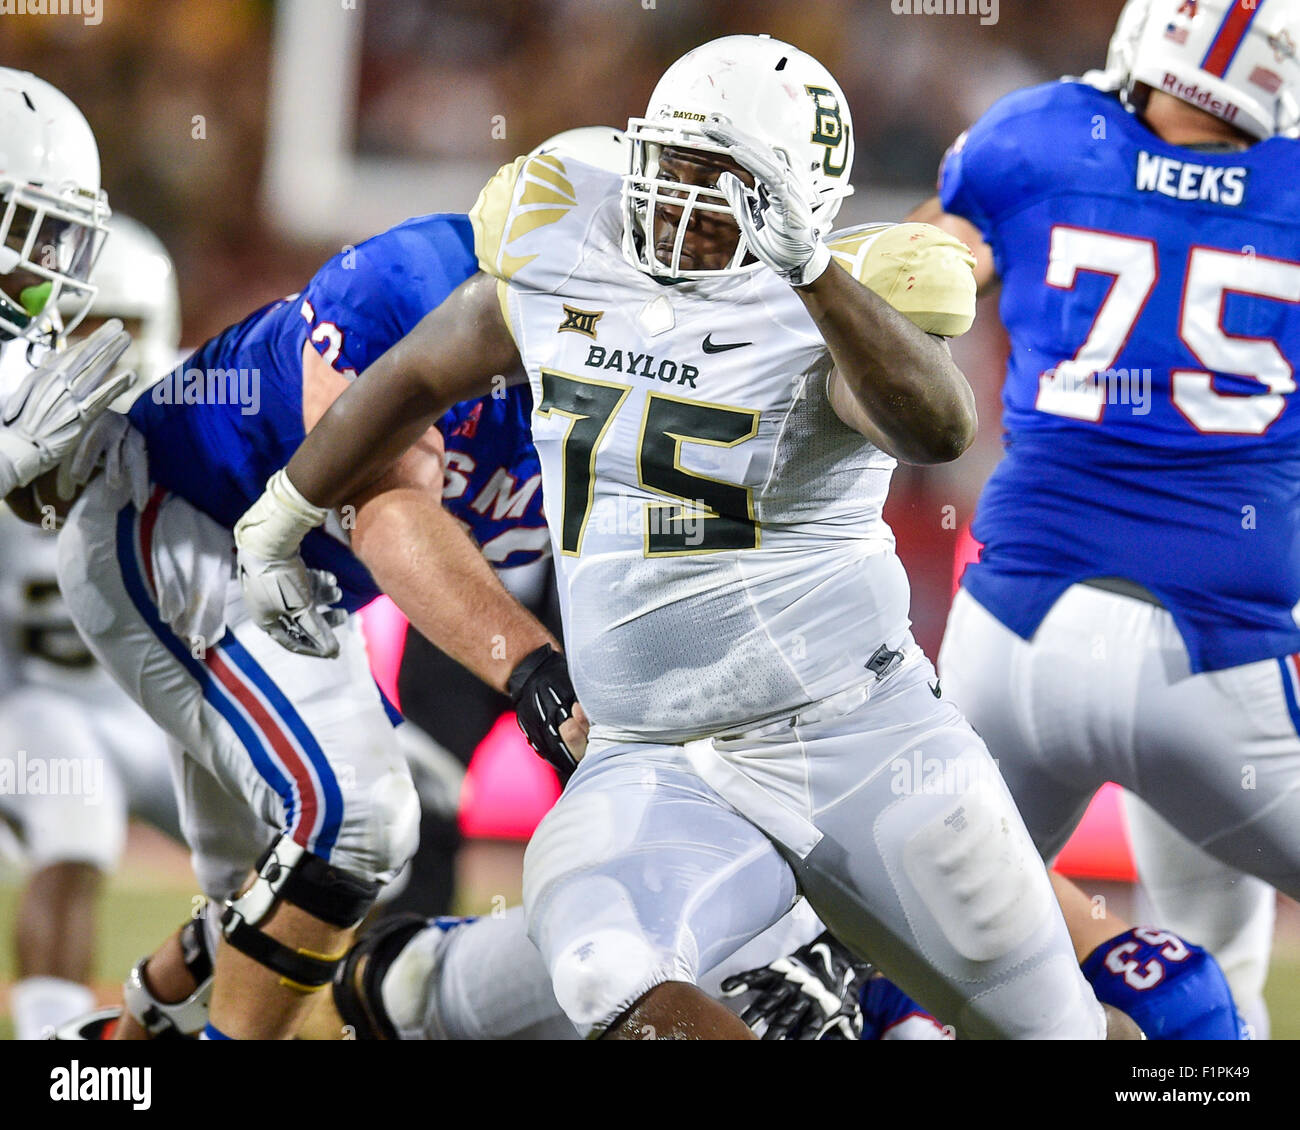 September 4th, 2015:.Baylor Bears defensive tackle Andrew Billings (75) rushes the line as he gets past Southern Methodist Mustangs offensive lineman Taylor Lasecki (52) and Southern Methodist Mustangs offensive lineman Evan Brown (63).during an NCAA Football game between the Baylor Bears and the SMU Mustangs at Gerald J. Ford Stadium in Dallas, Texas.Baylor wins 56-21.Manny Flores/CSM Stock Photo